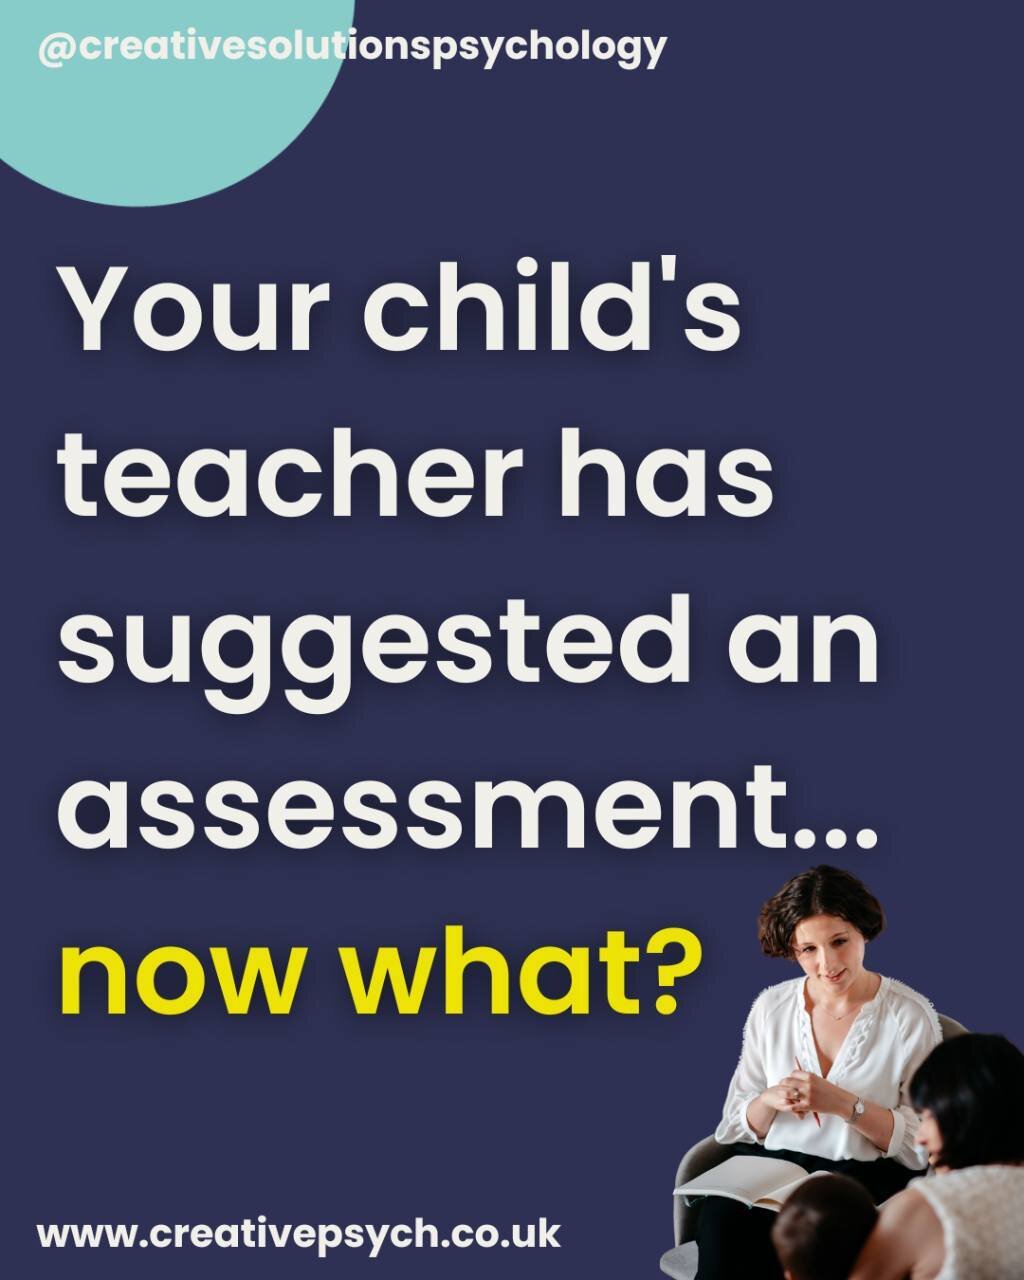 When your child's teacher suggests an assessment, it can evoke a range of emotions - concern, confusion, perhaps even defensiveness.
Does this sound familiar?

This suggestion is often made with your child's best interests at heart. It is not made to